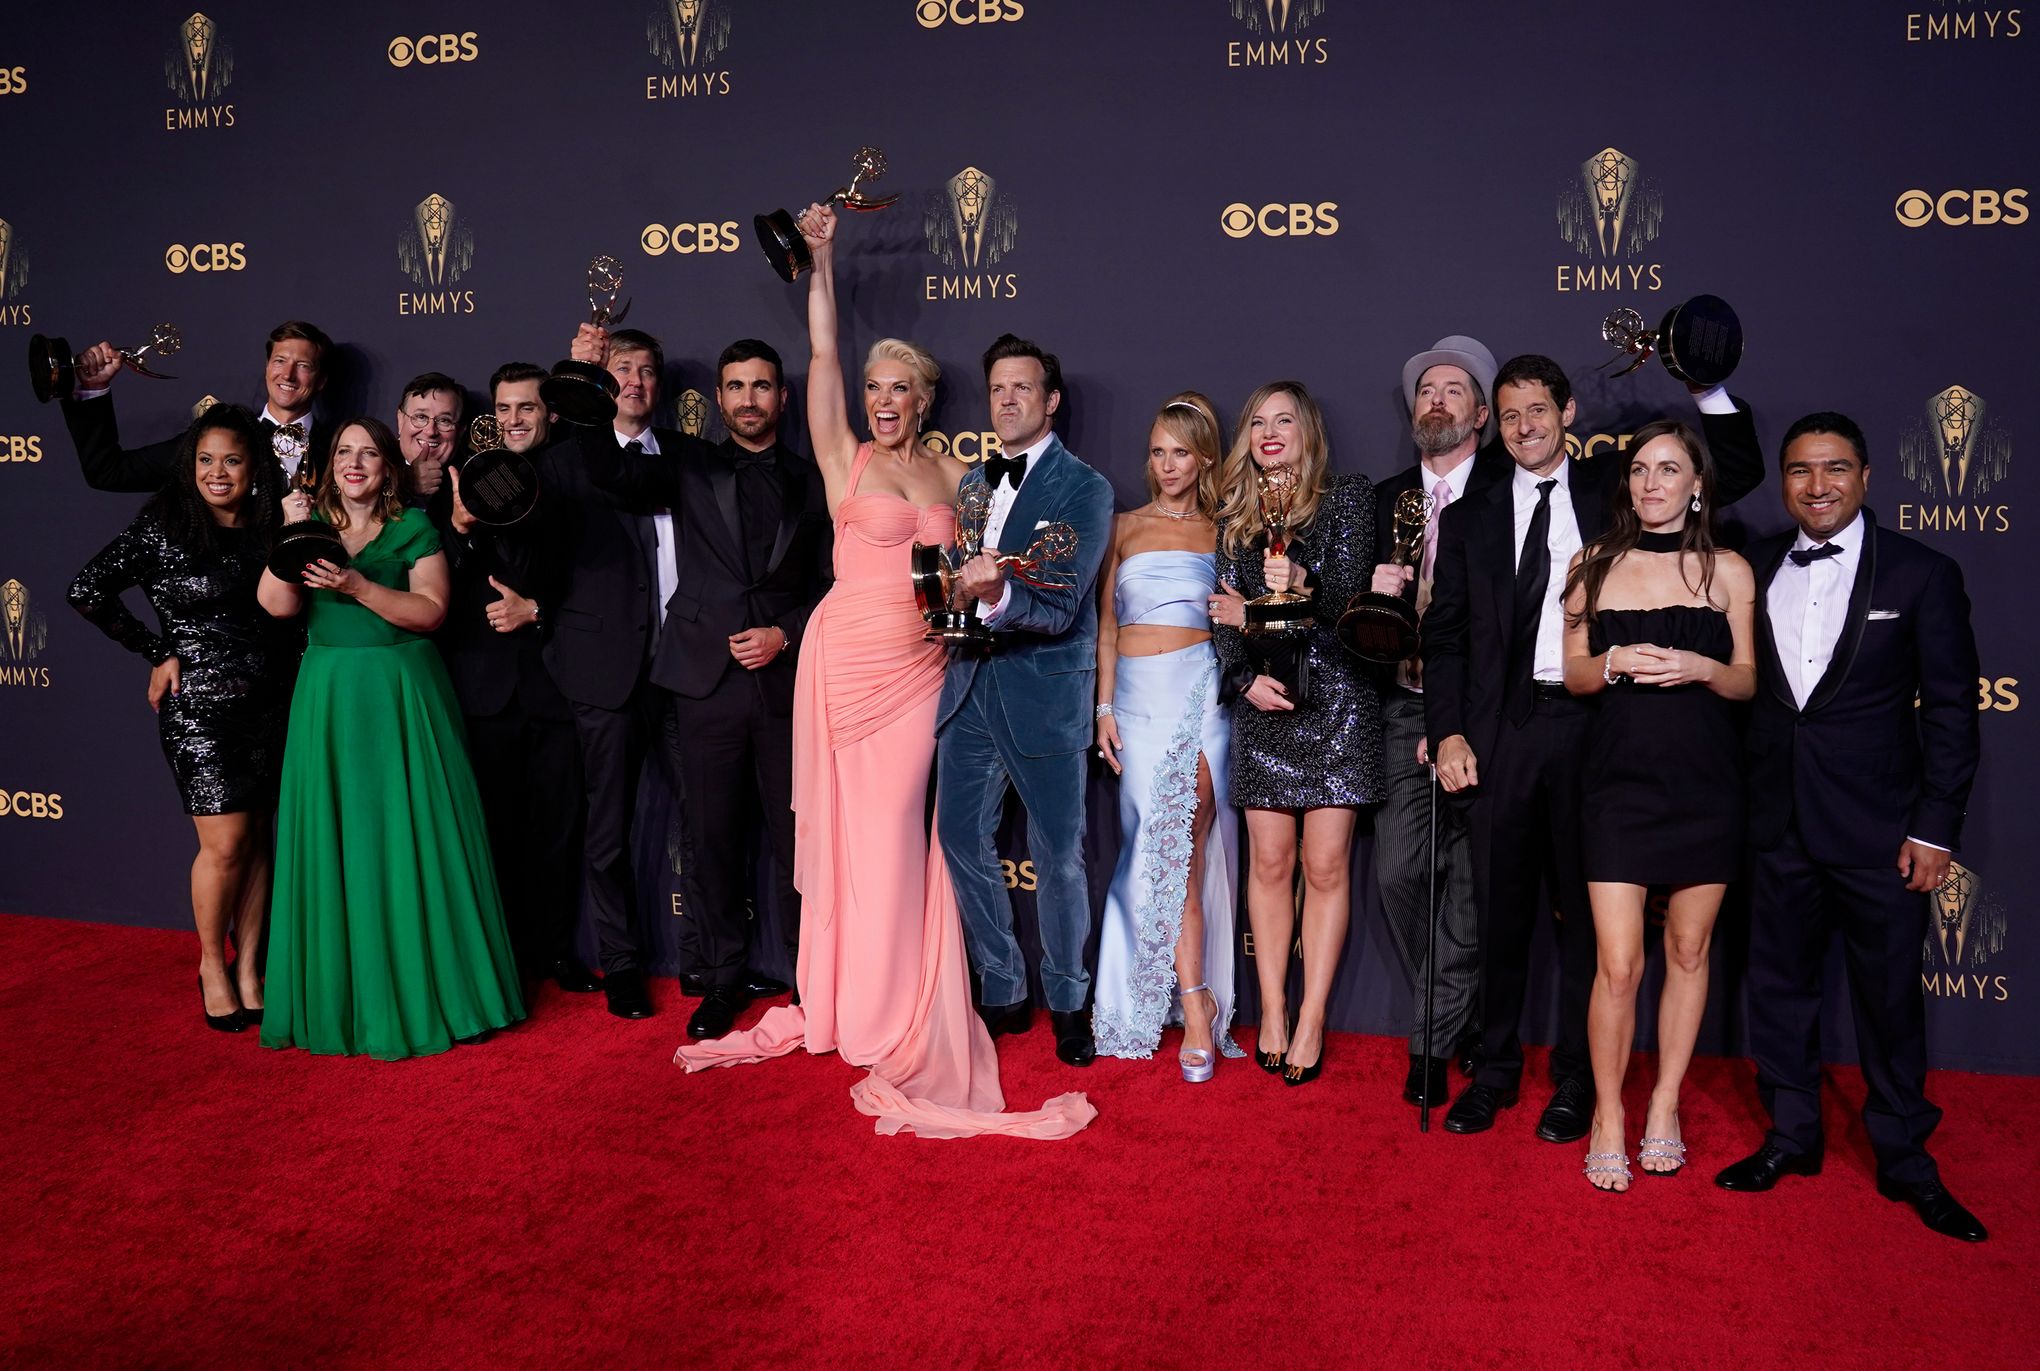 The Queen's Gambit cast and crew celebrate Emmy wins with game